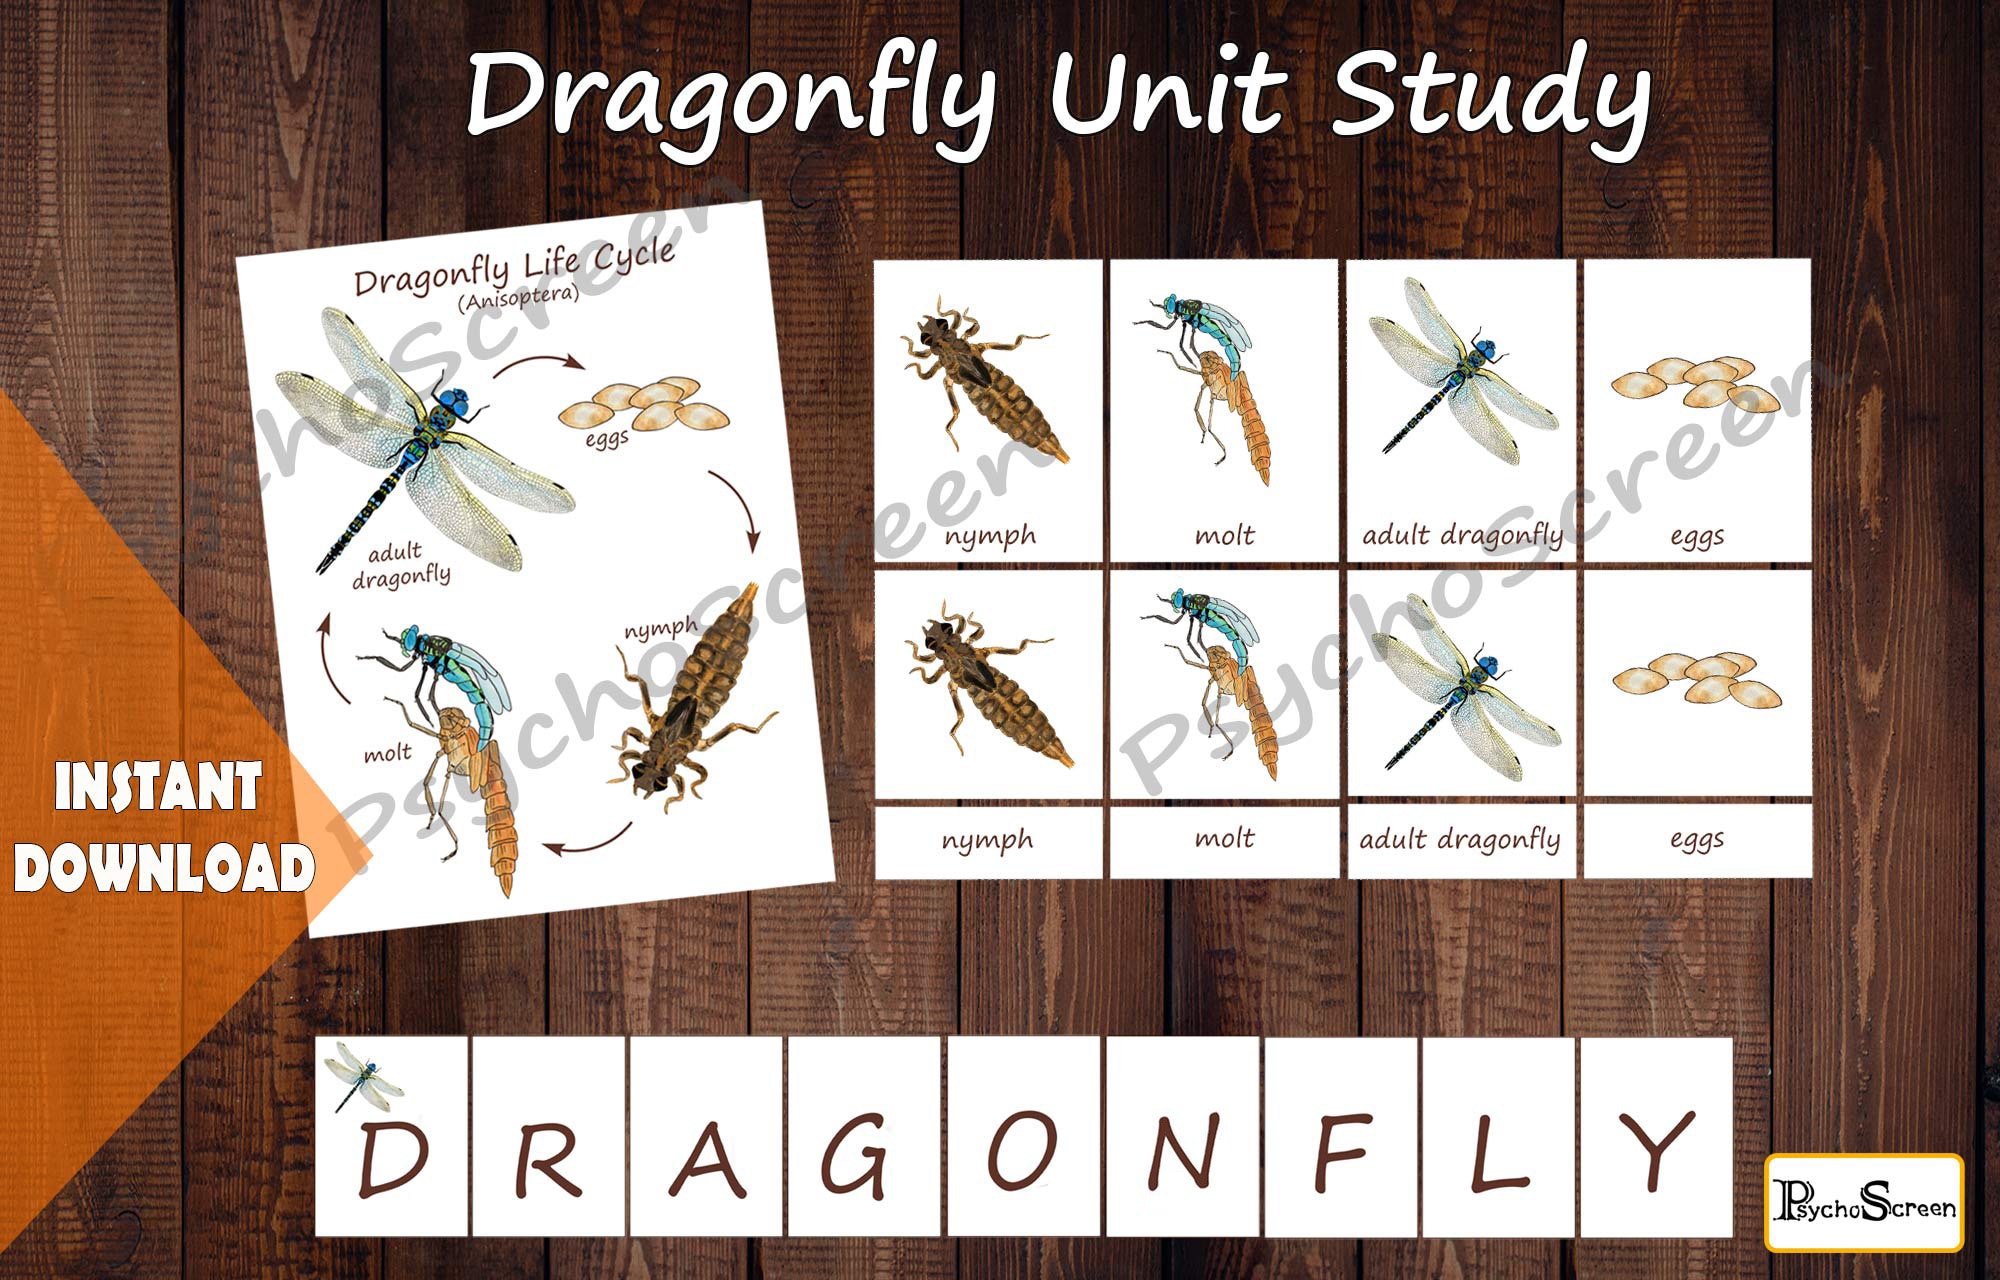 dragonfly case study answers